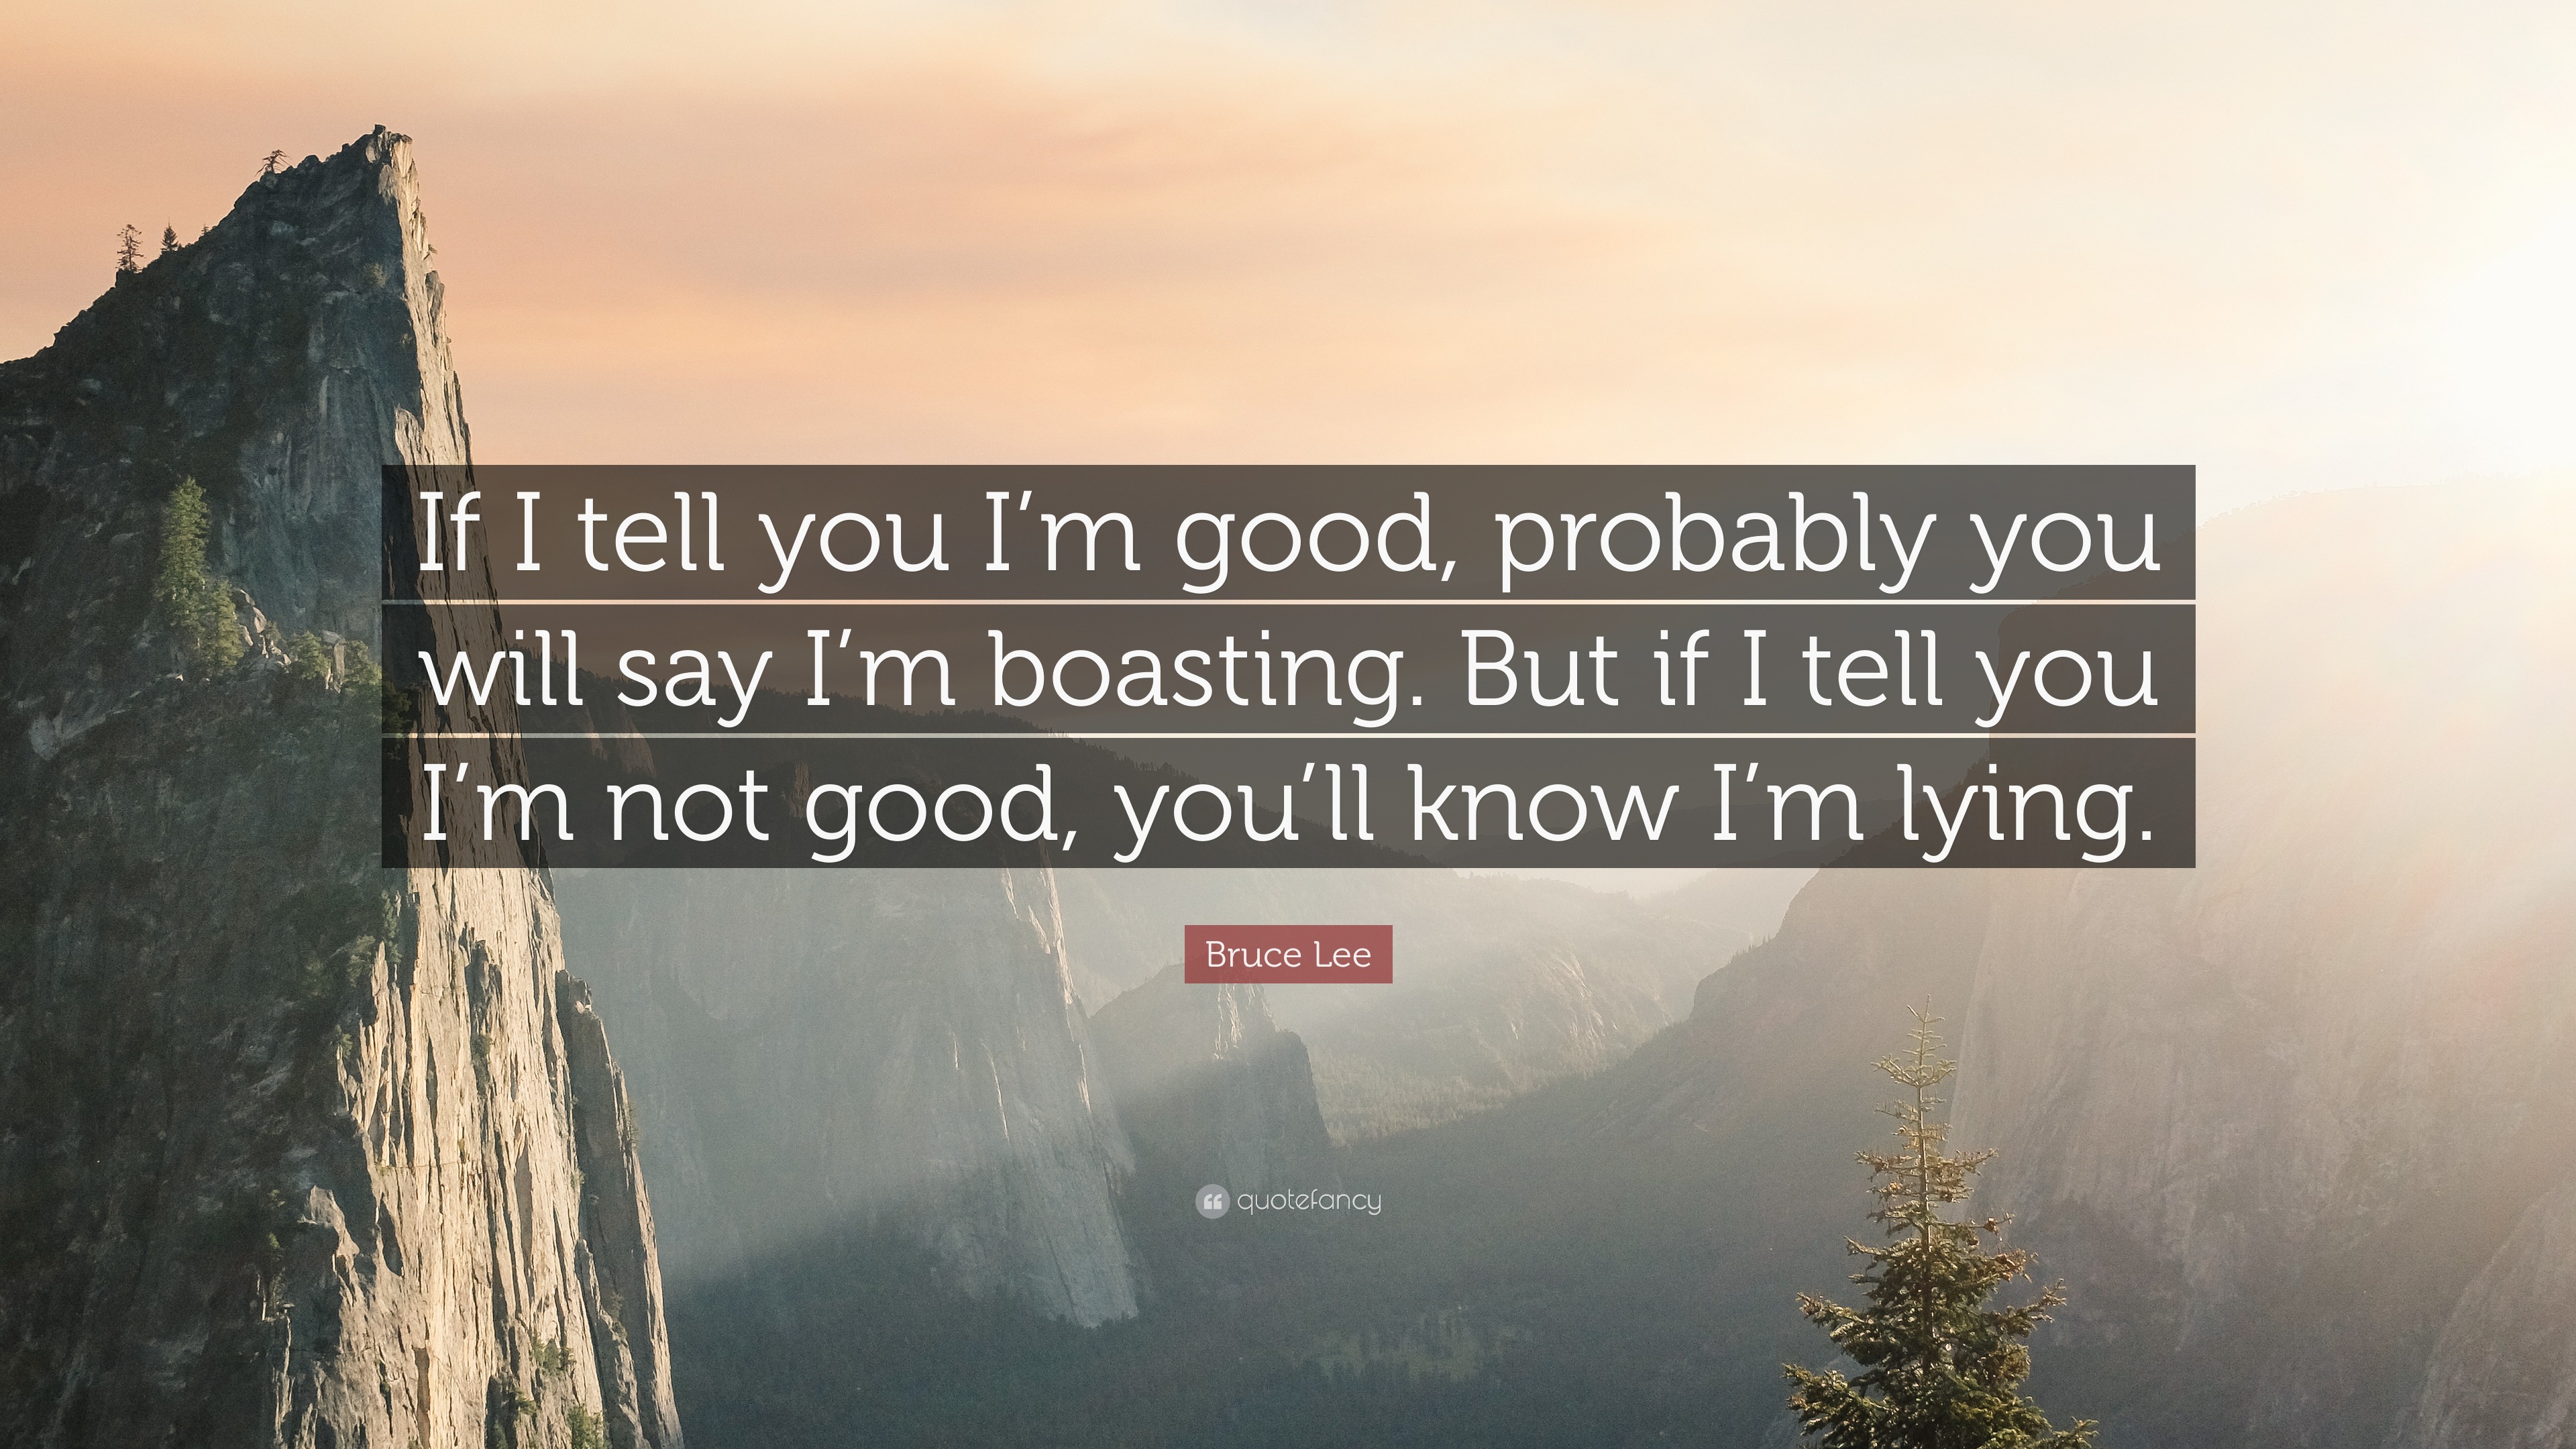 Bruce Lee Quote: "If I tell you I'm good, probably you ...